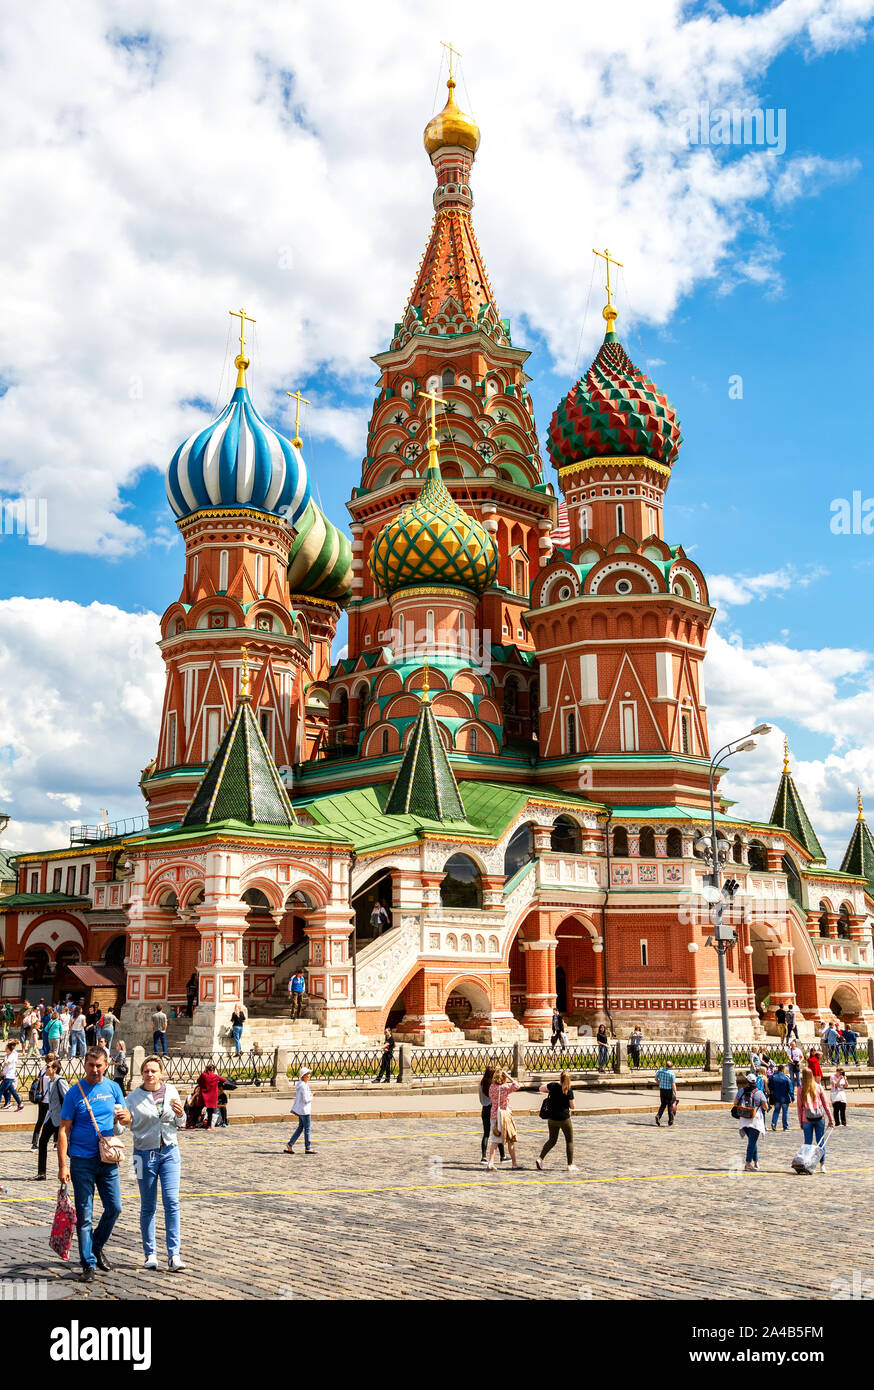 Moscow, Russia - July 7, 2019: Traditional Russian architecture. Saint Basil's (Pokrovsky) Cathedral on Red Square Stock Photo